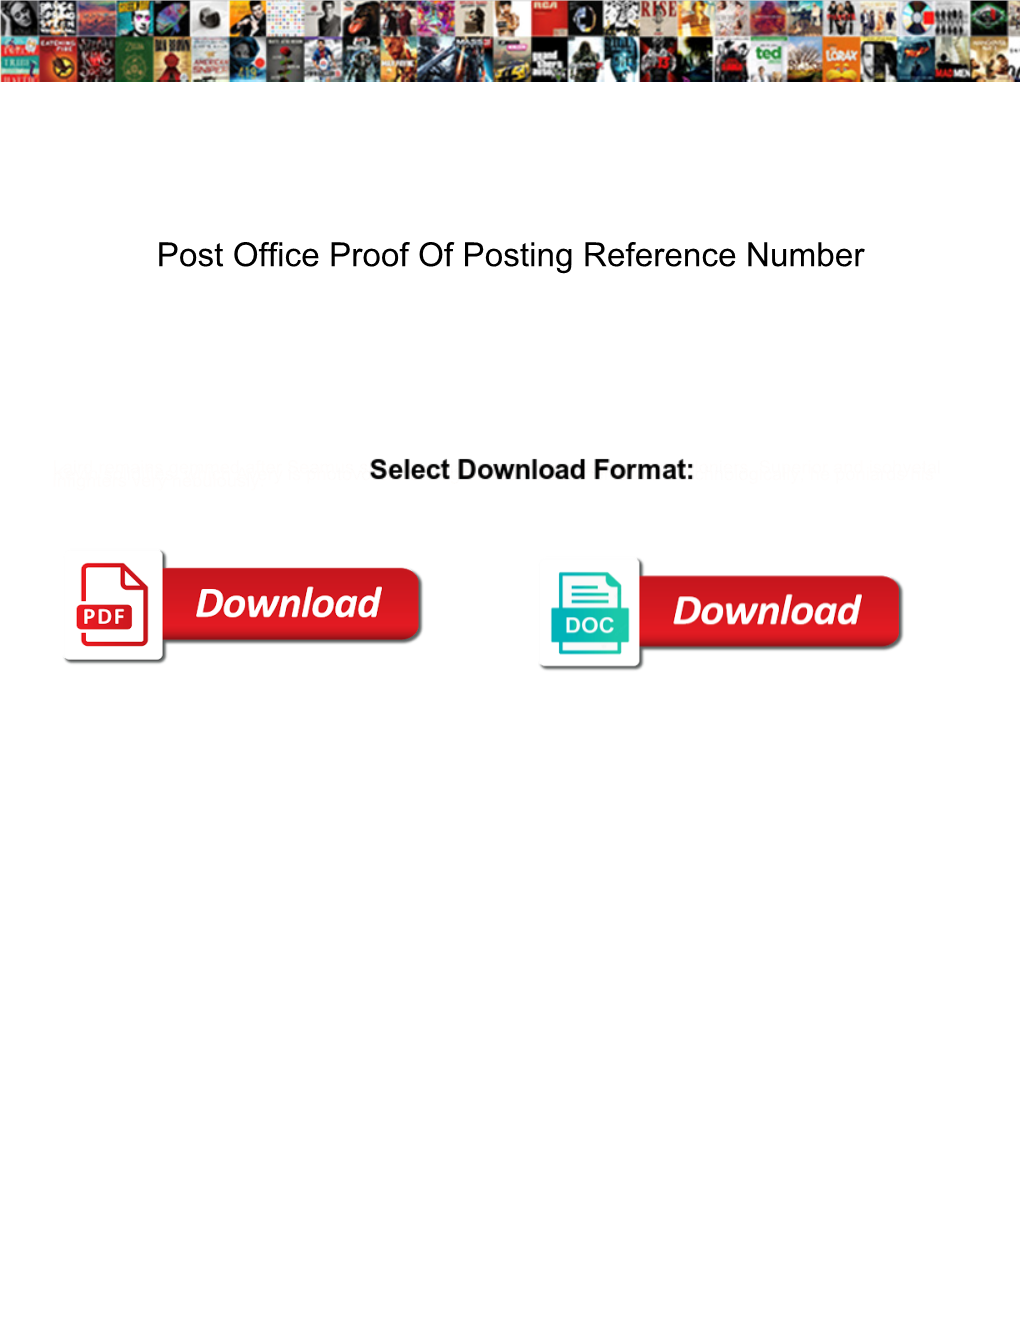 Post Office Proof of Posting Reference Number